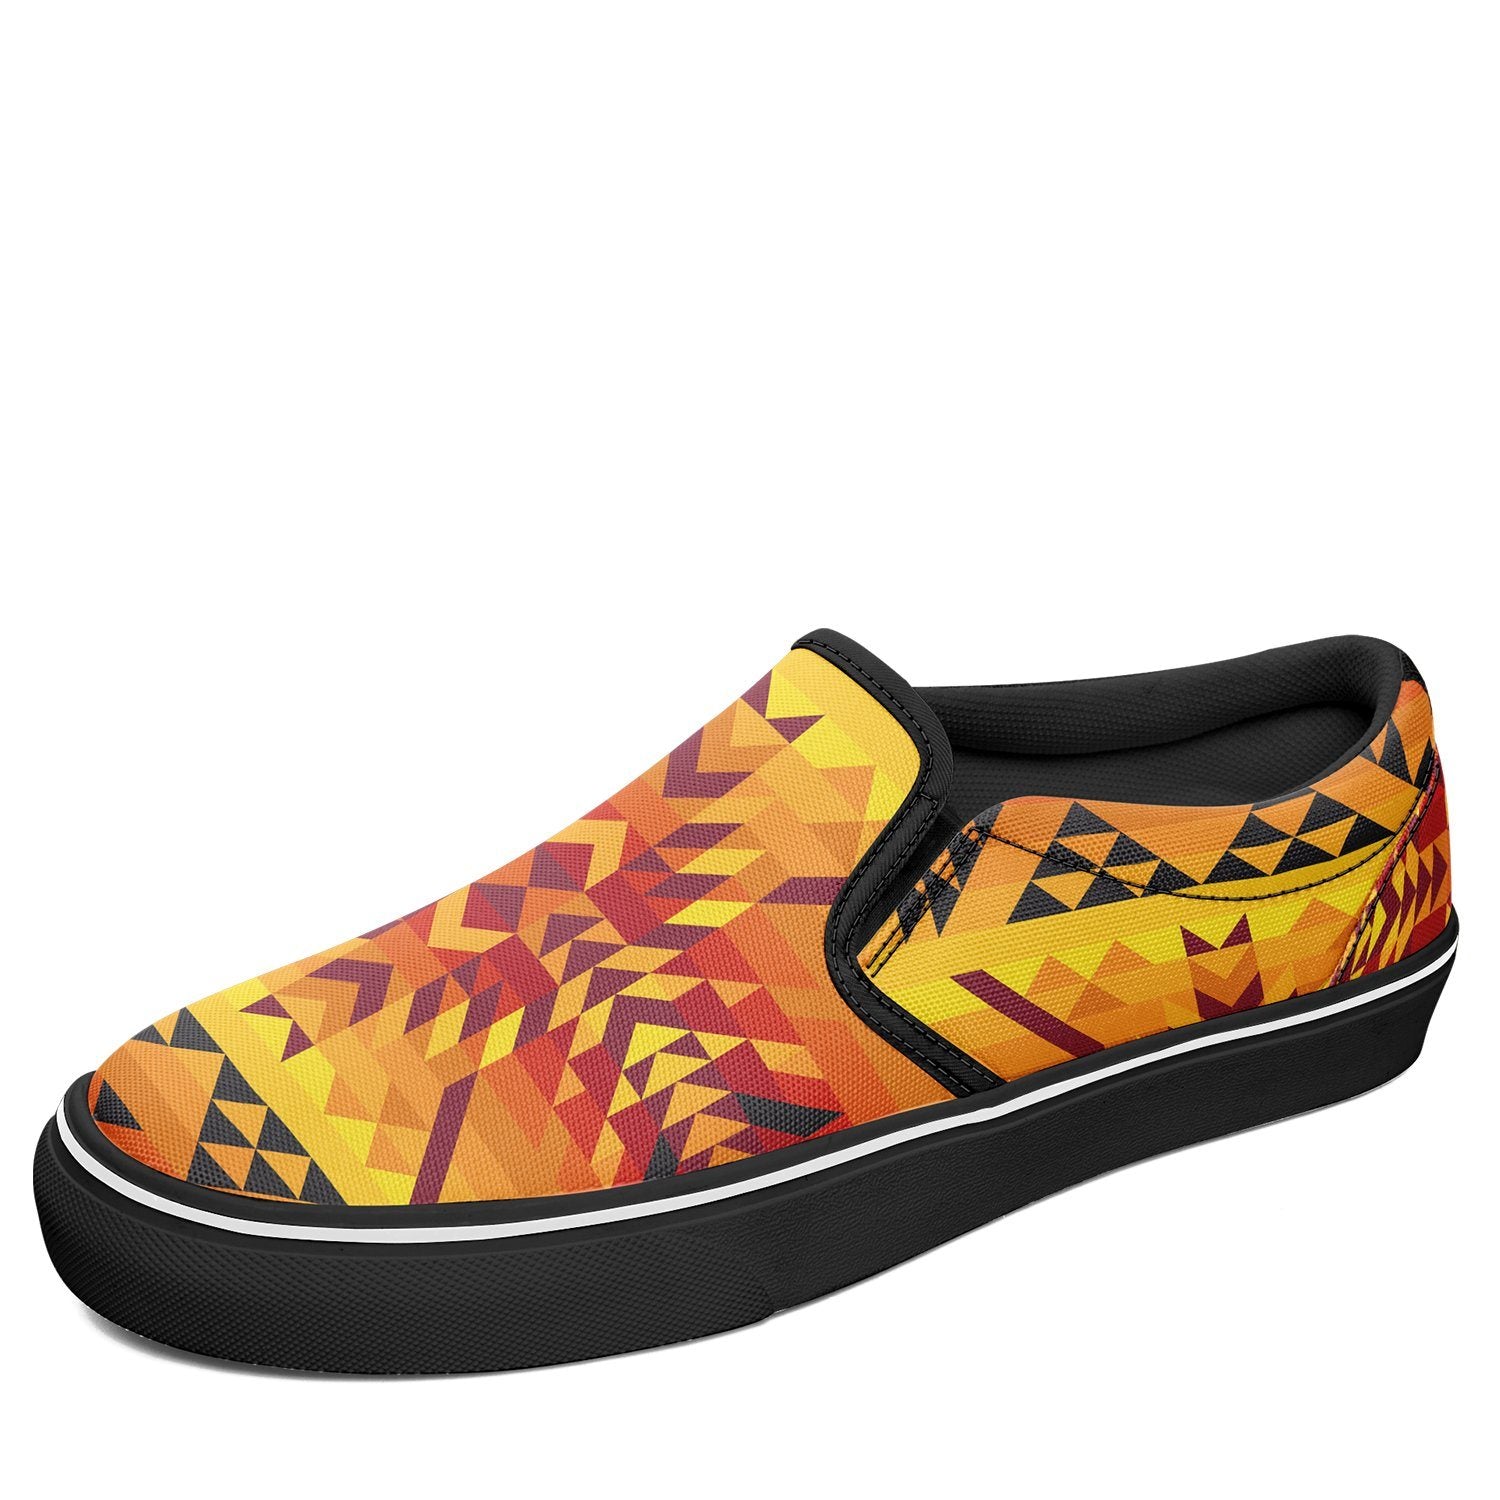 Desert Geo Yellow Red Otoyimm Canvas Slip On Shoes otoyimm Herman US Youth 1 / EUR 32 Black Sole 